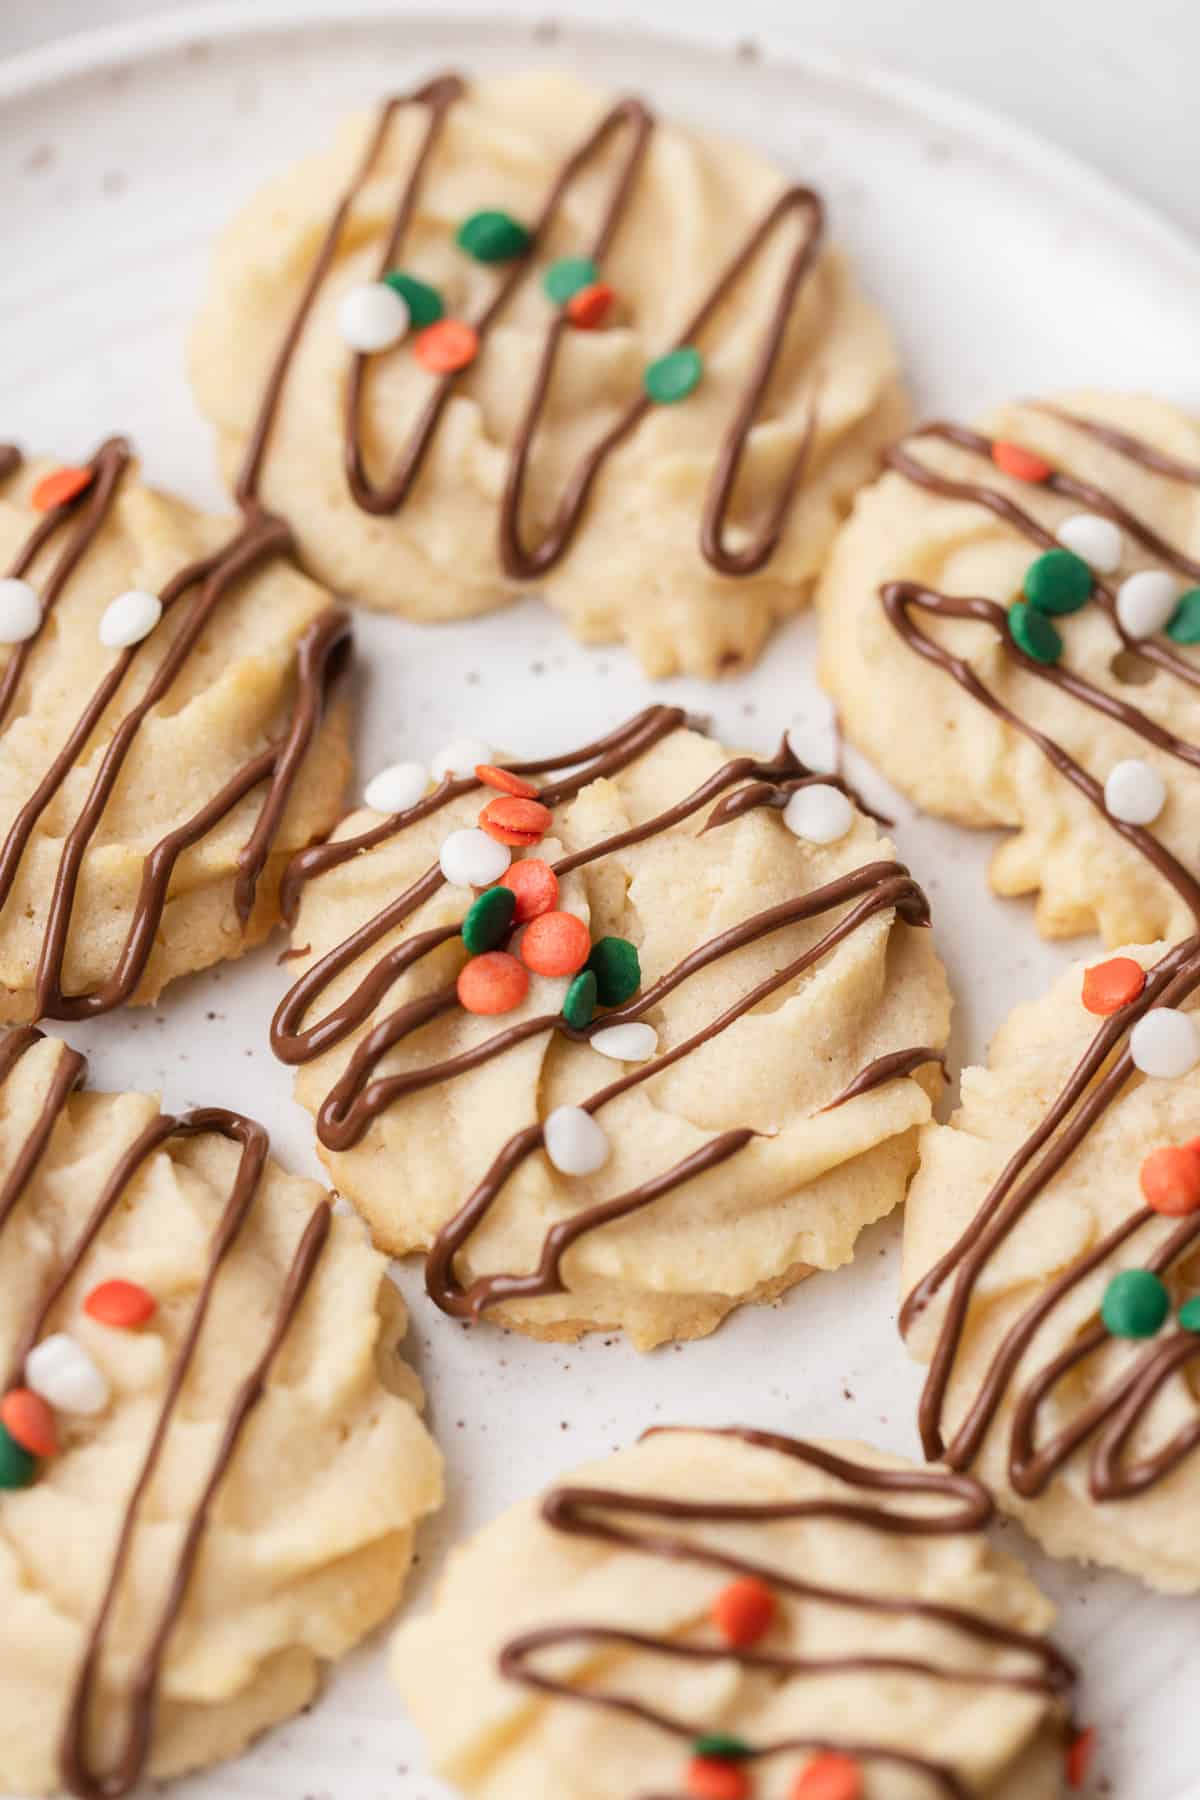 Danish butter cookies with Christmas sprinkles and chocolate drizzle.